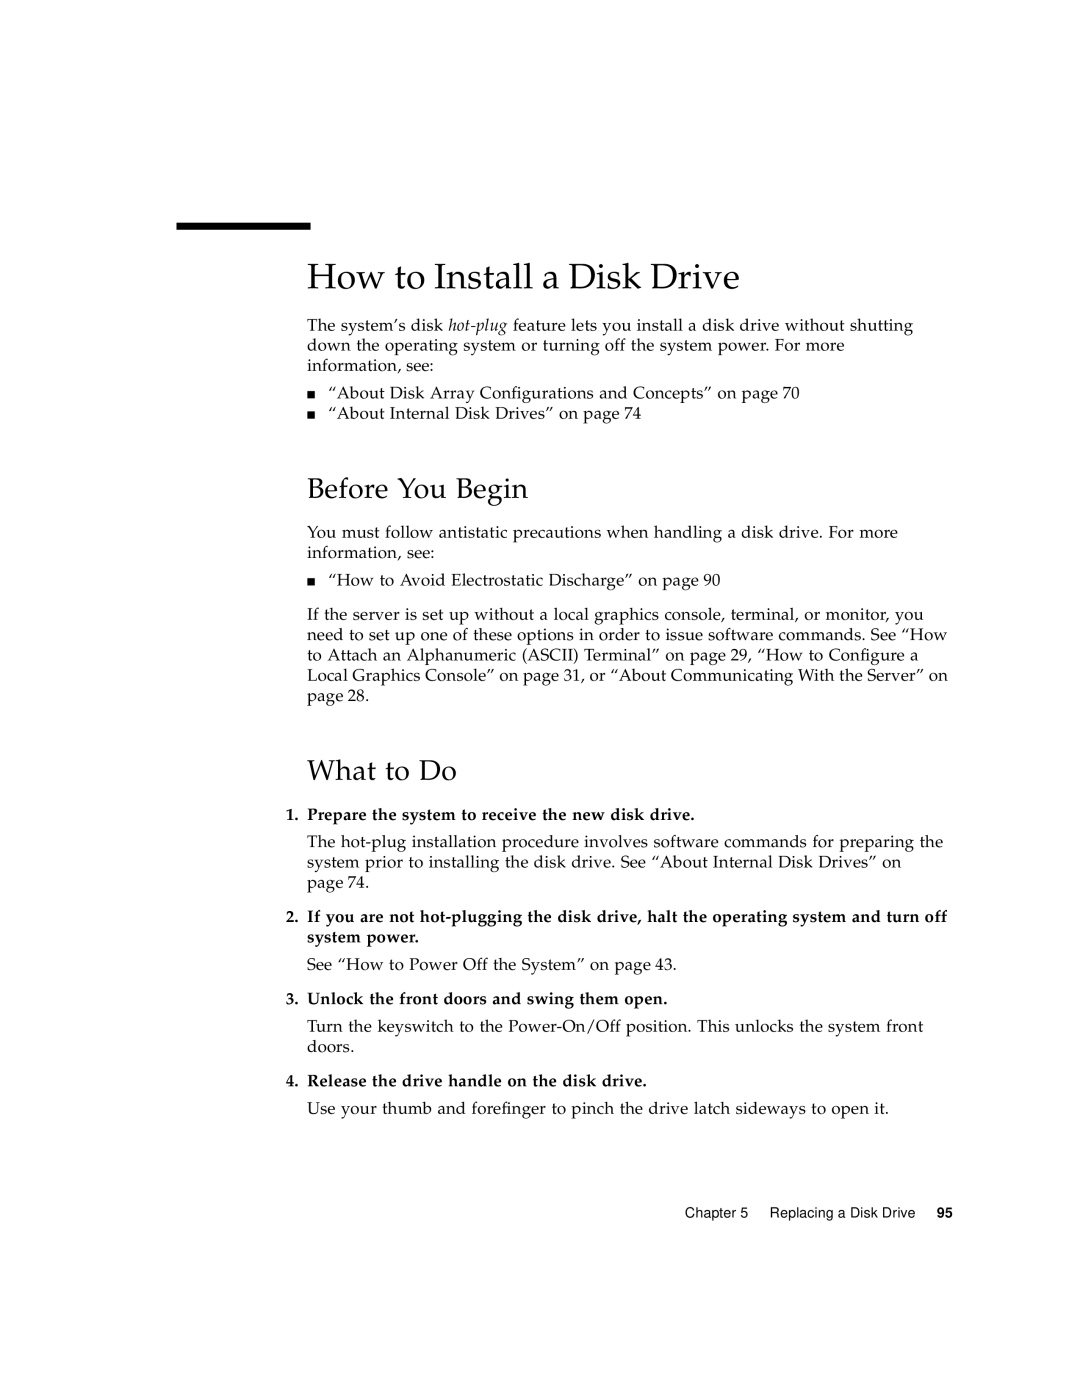 Sun Microsystems 220R How to Install a Disk Drive, Prepare the system to receive the new disk drive, Before You Begin 